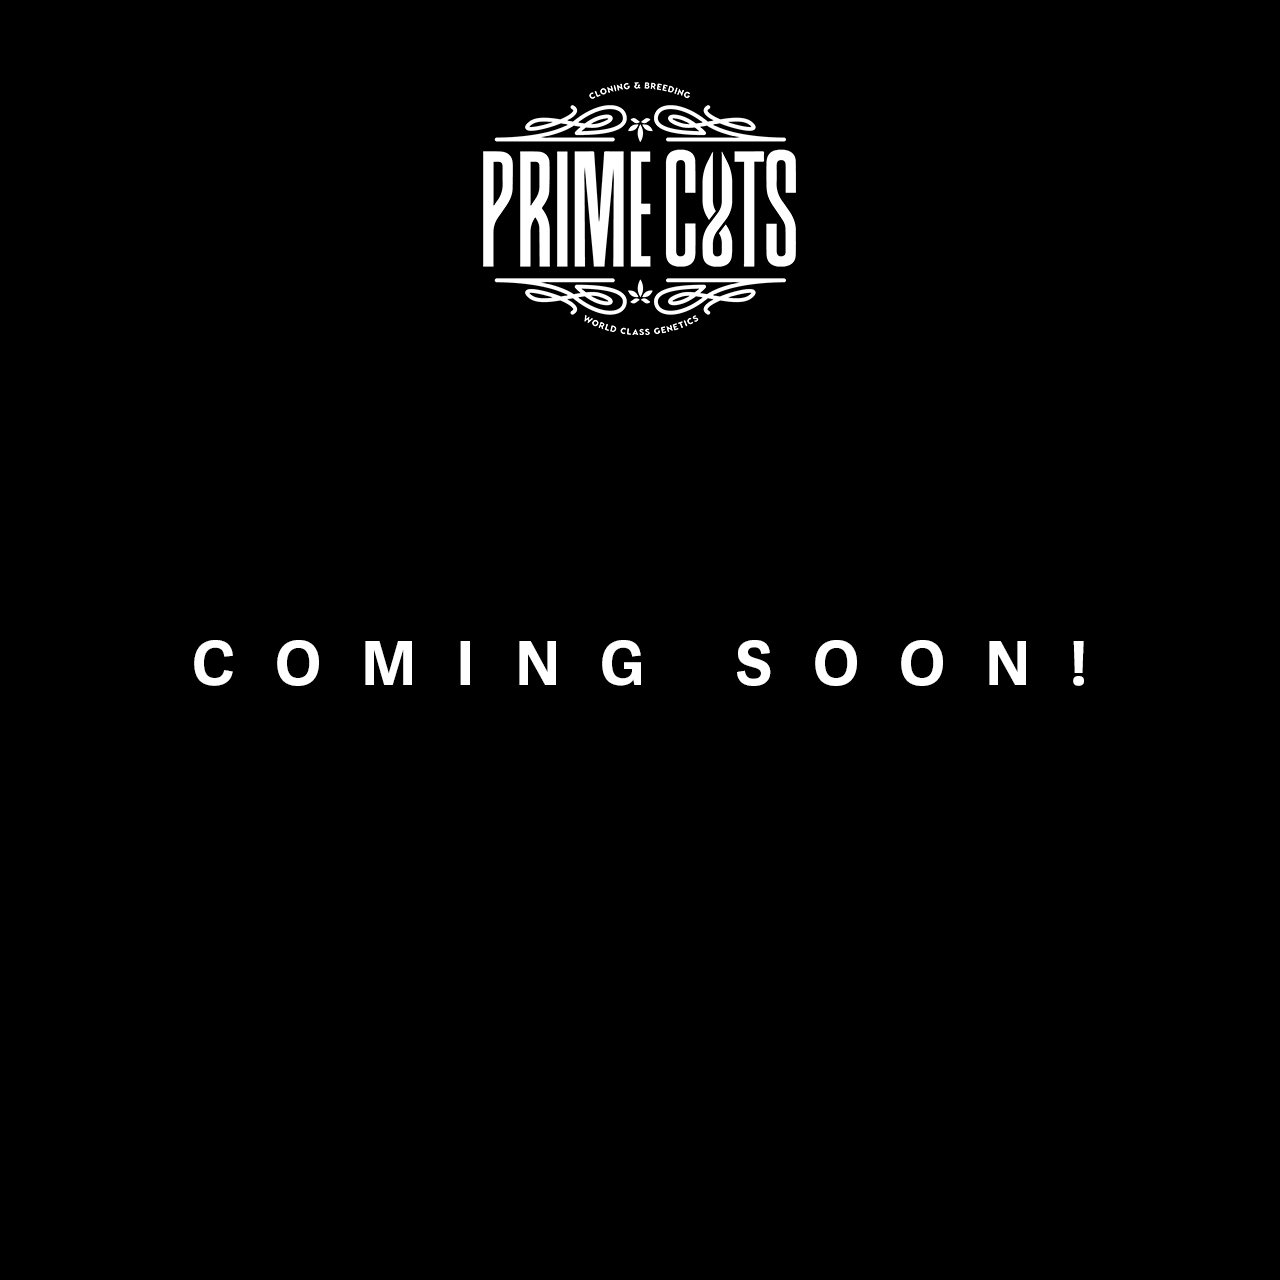 Prime-Cuts-Coming-Soon!.png